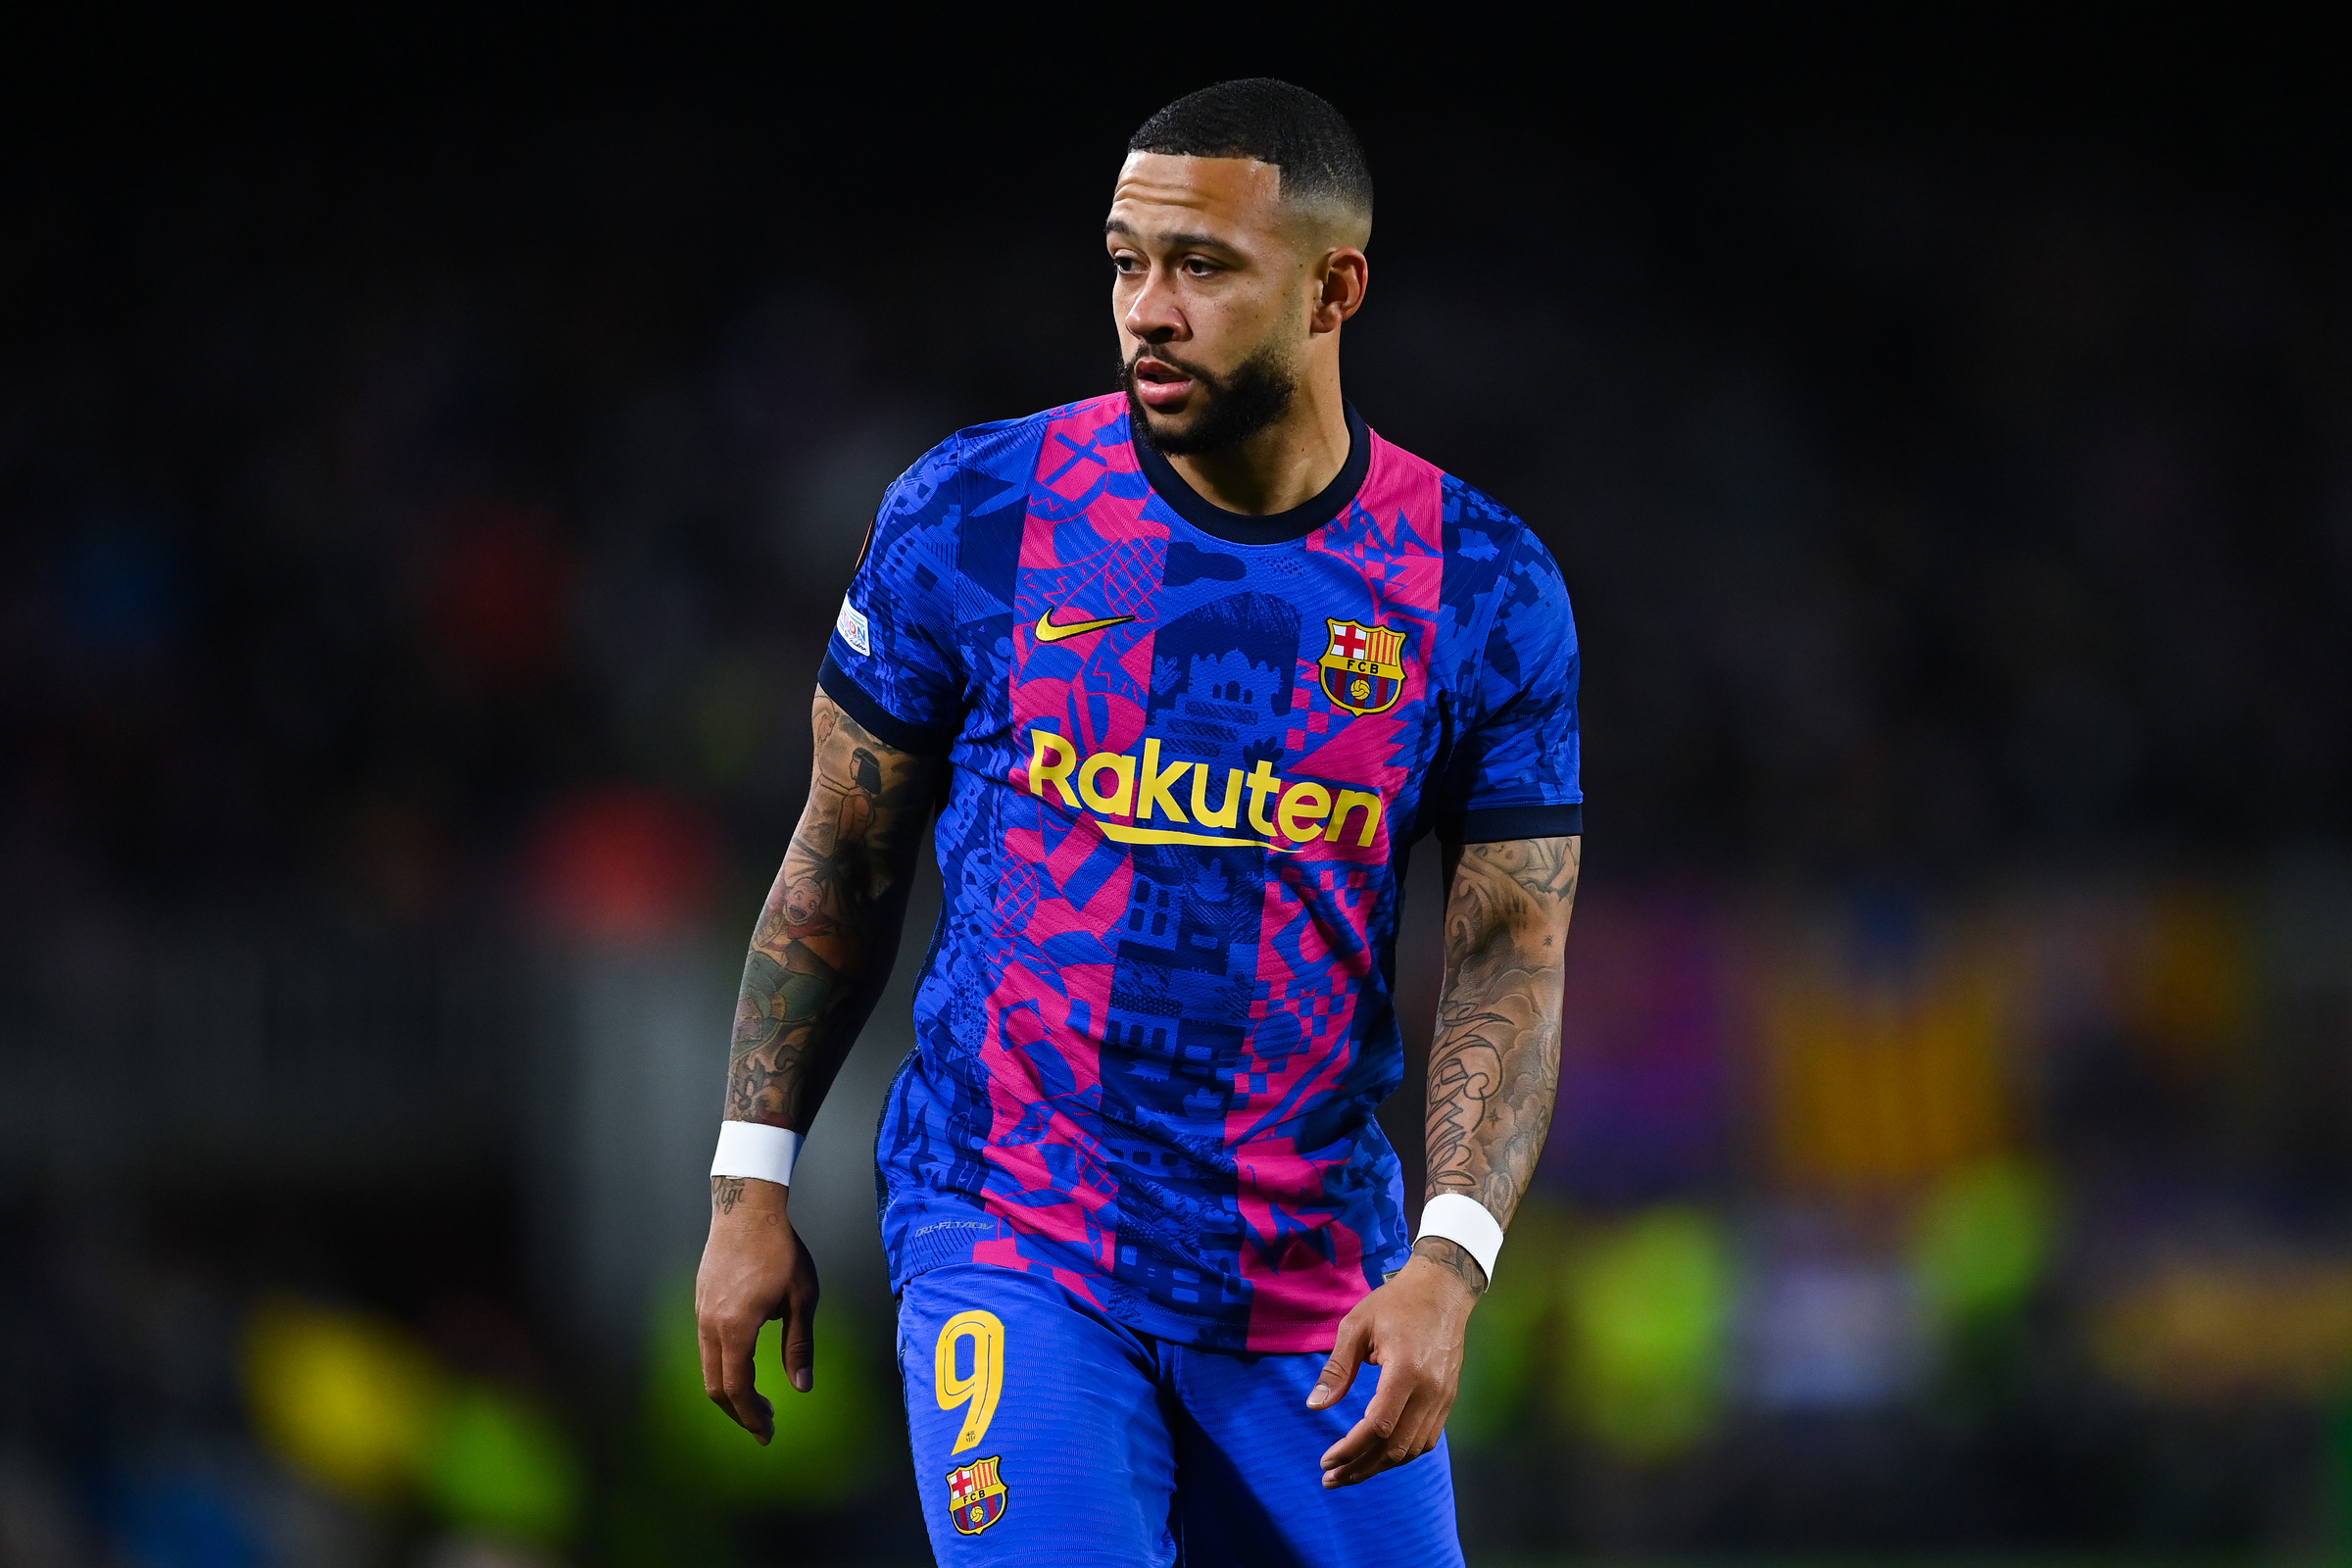 Memphis Depay is close to signing for FC Barcelona